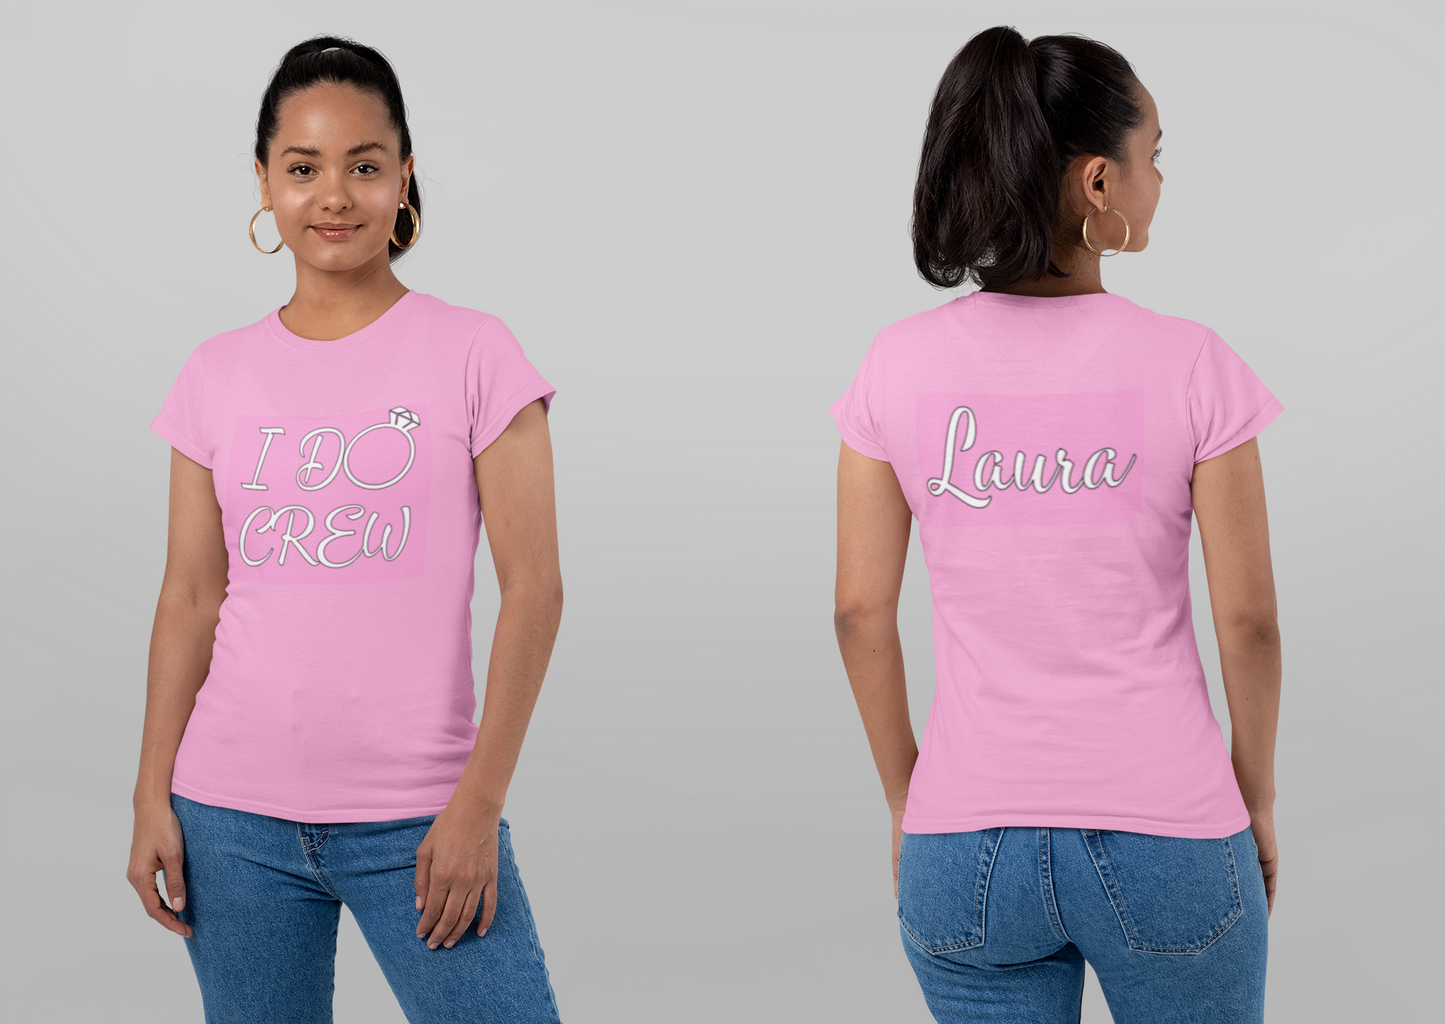 Hen party T shirts ( I do crew)